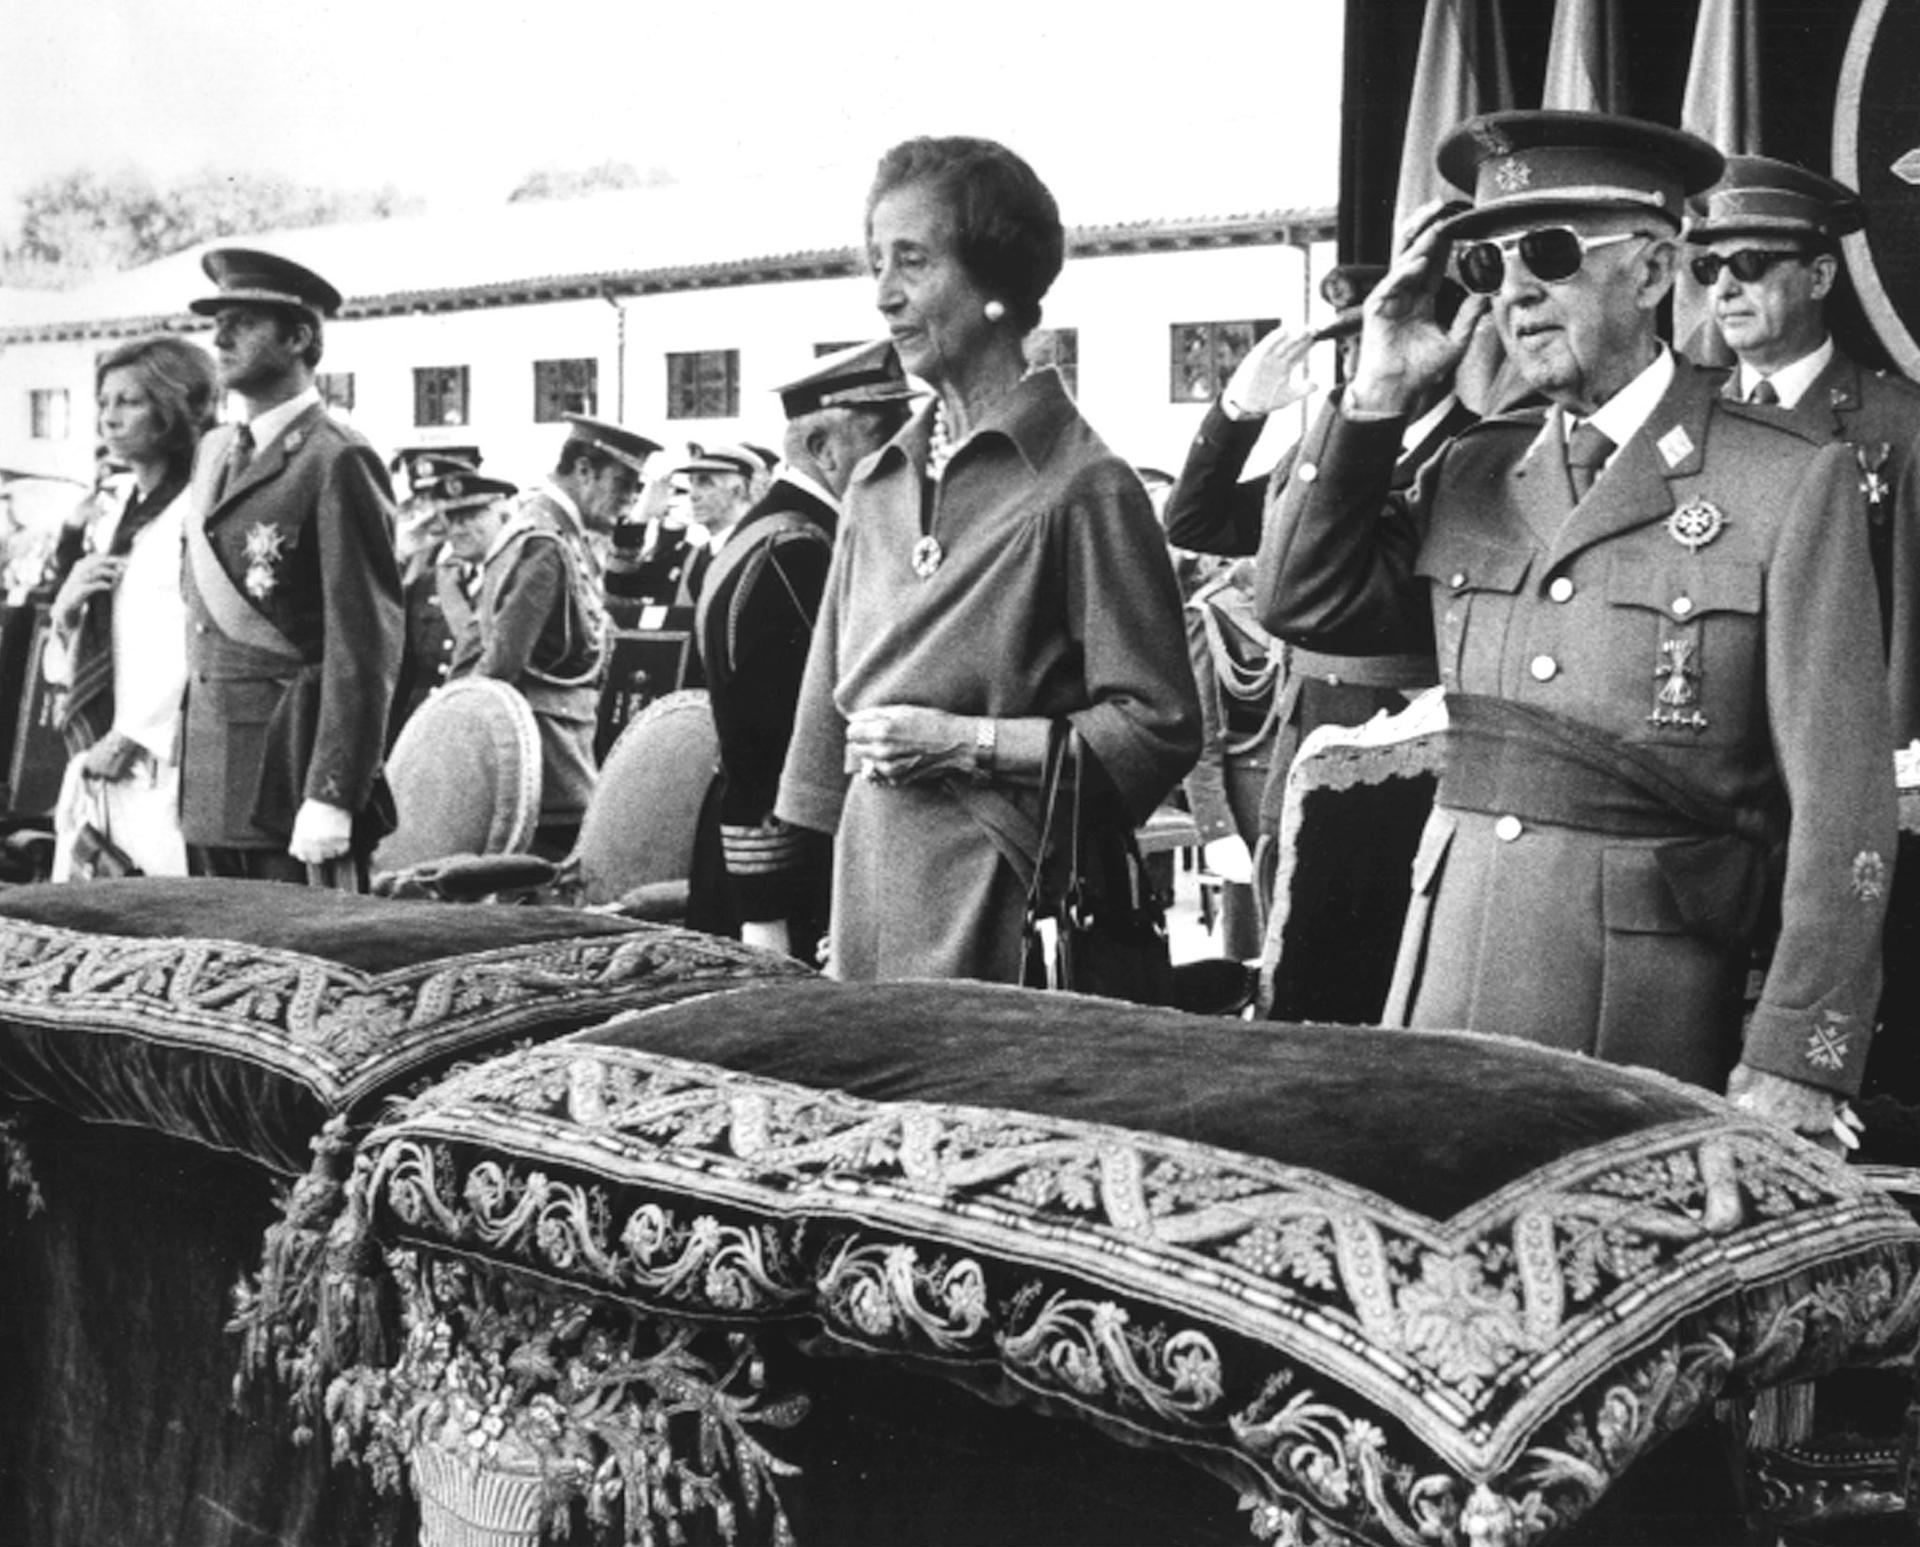 Dictator Francisco Franco stands in military apparel next to his wife at an event.